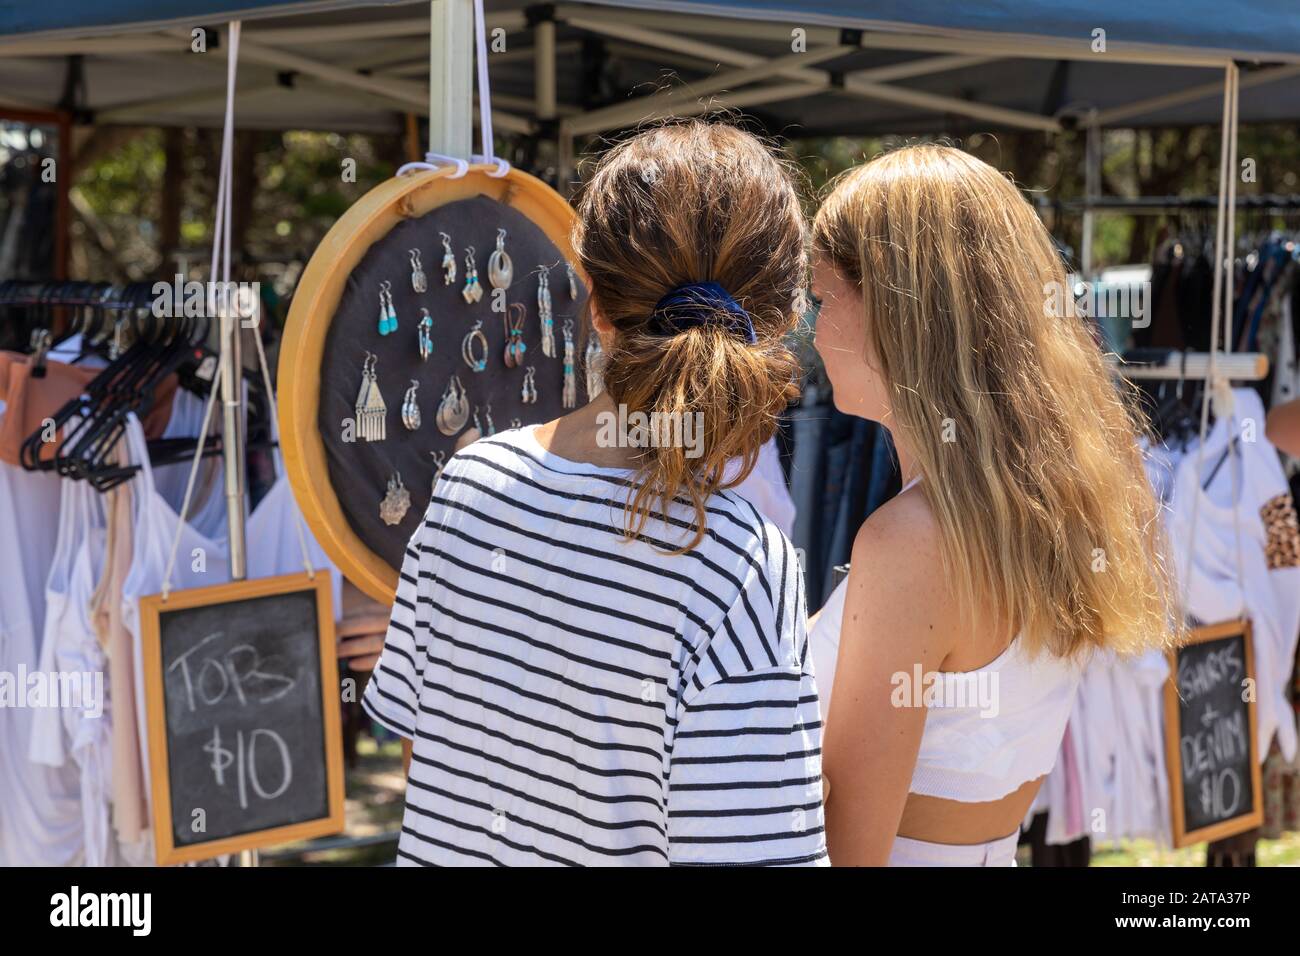 Byron Bay teenager girls model released shopping for jewellery at street market stall in Byron Bay , new south wales,Australia Stock Photo